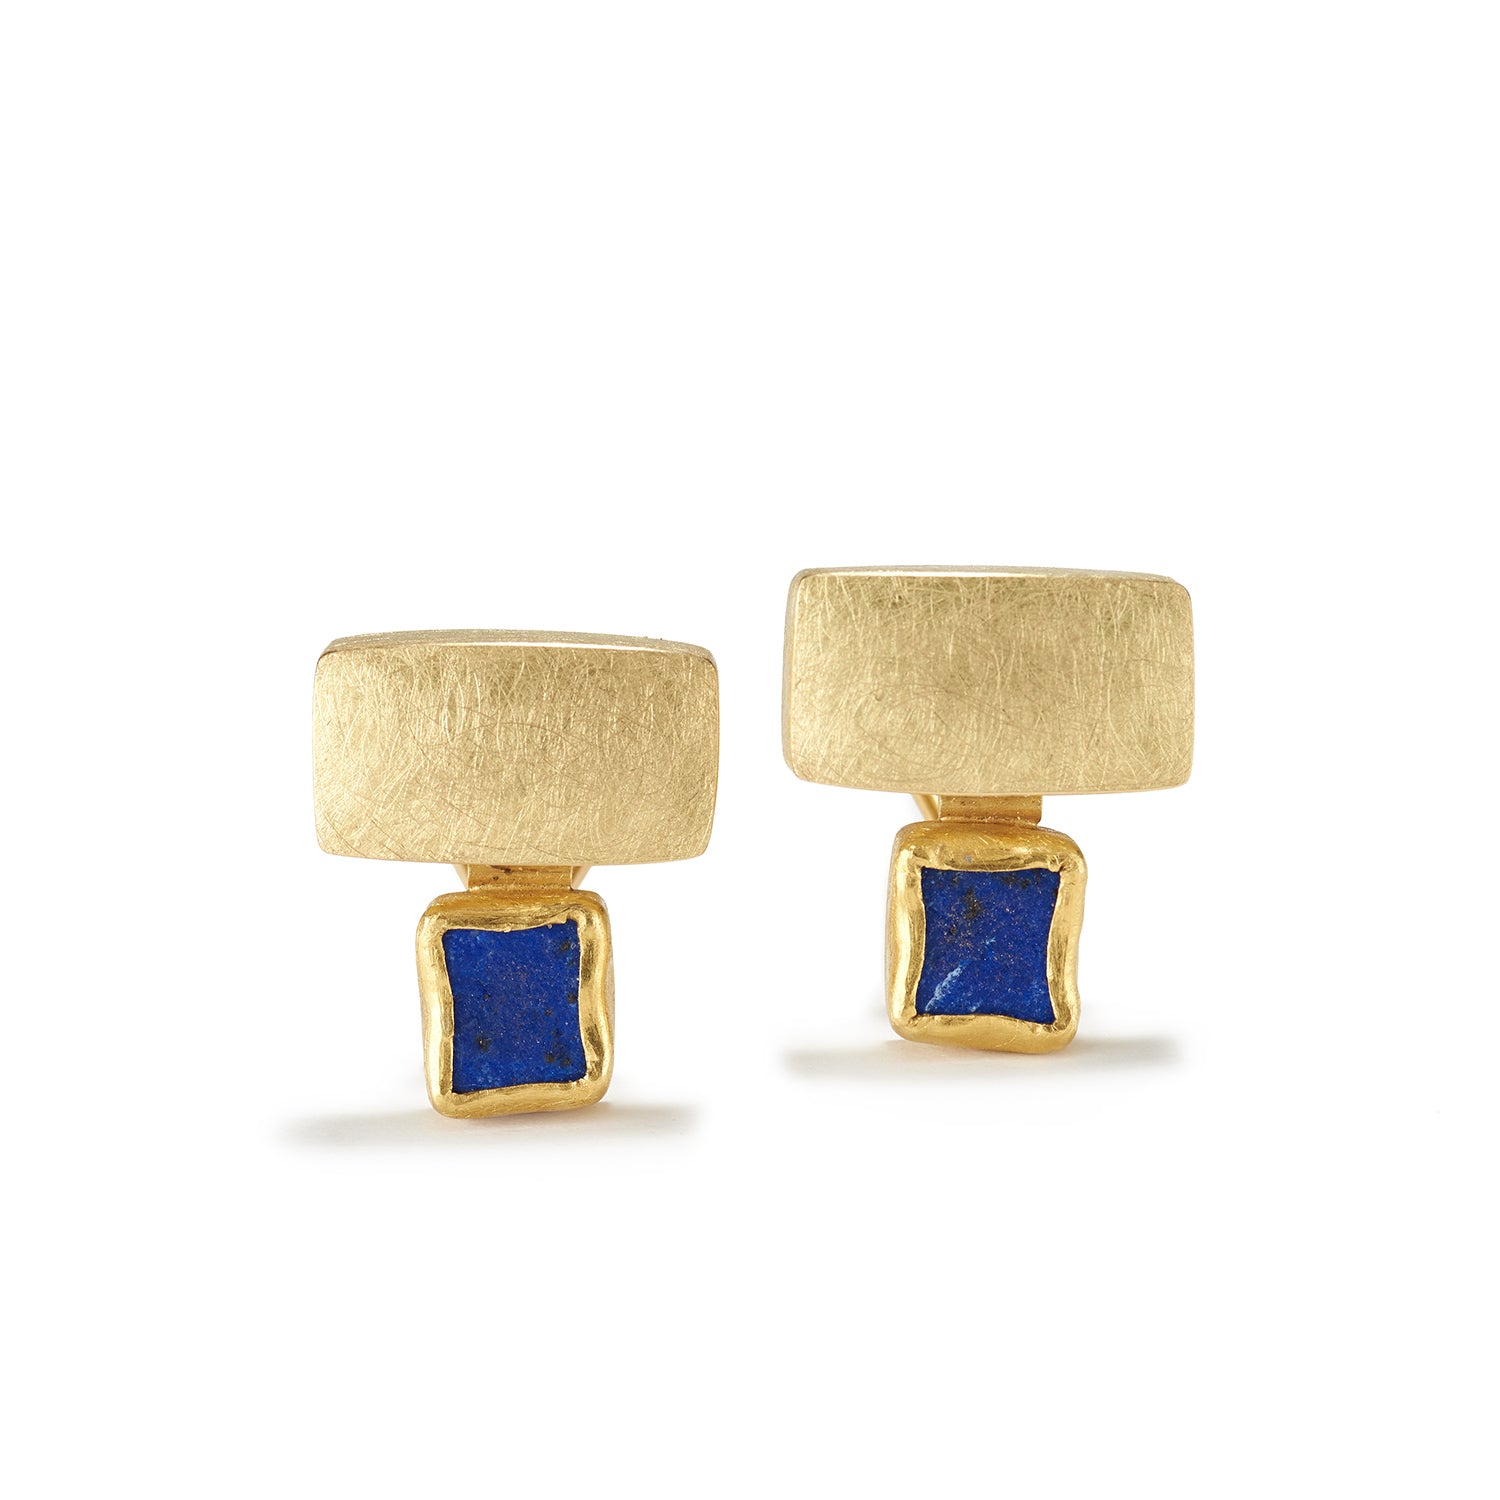 Gold and Rough Lapis Earrings